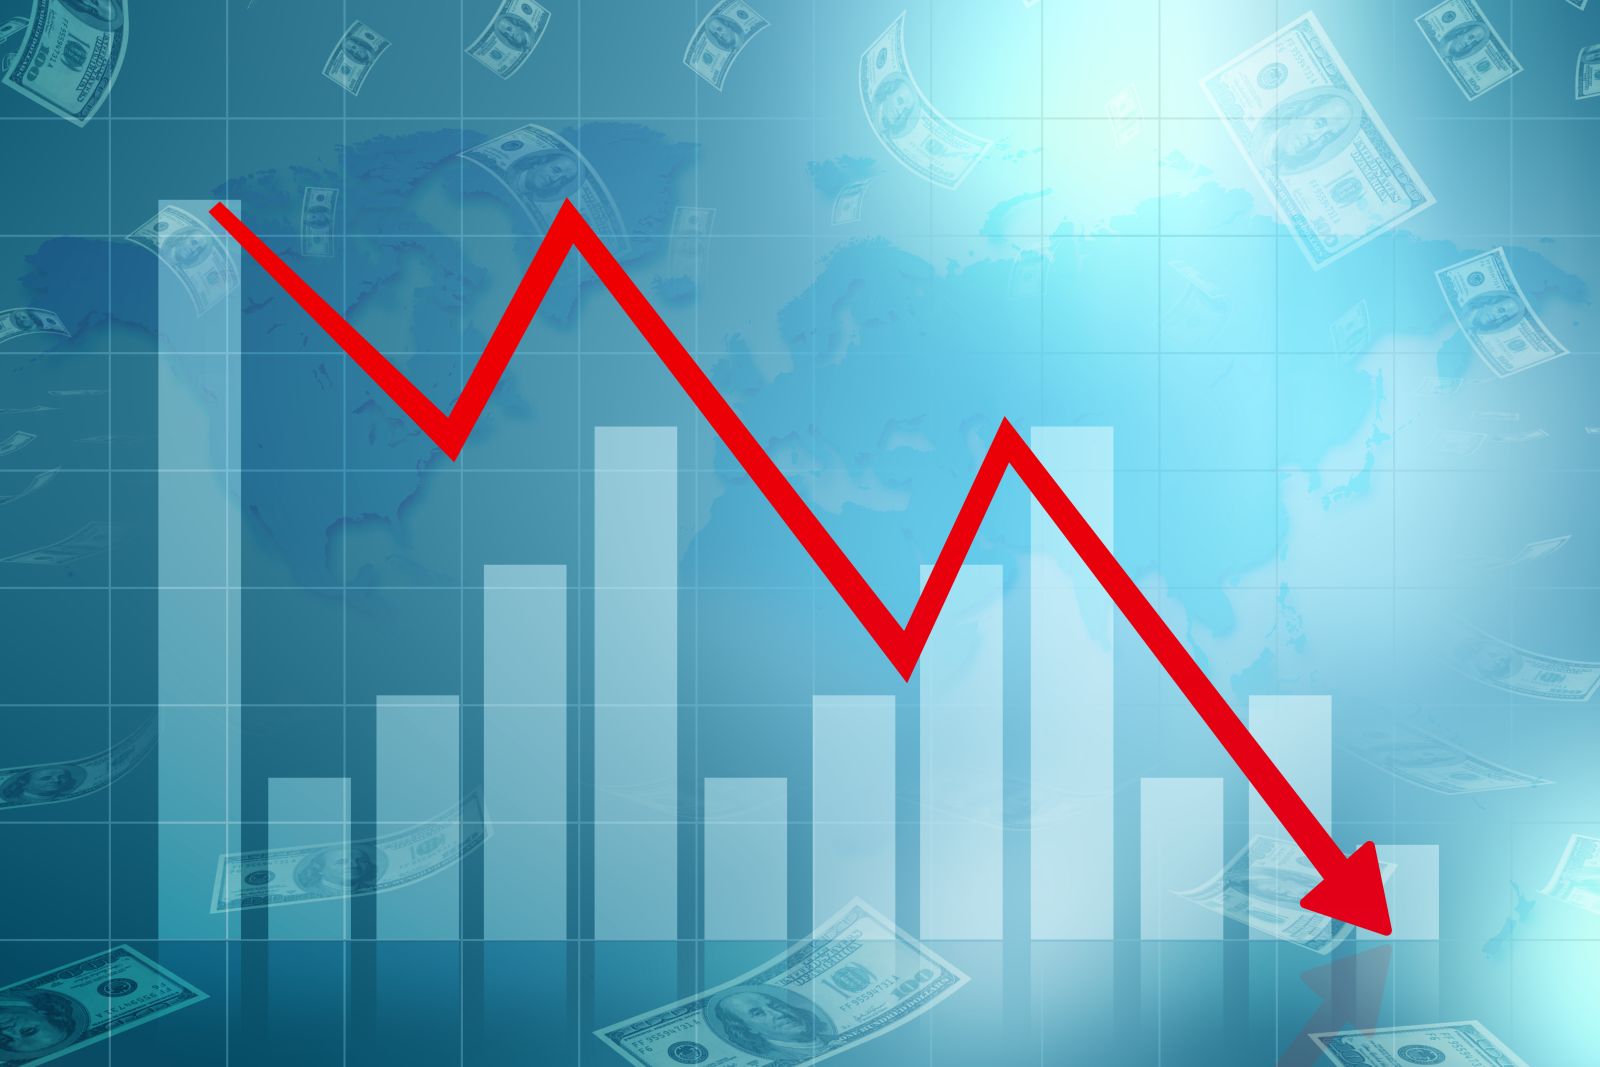 Charts, tickers, traders - shutterstock_567496438